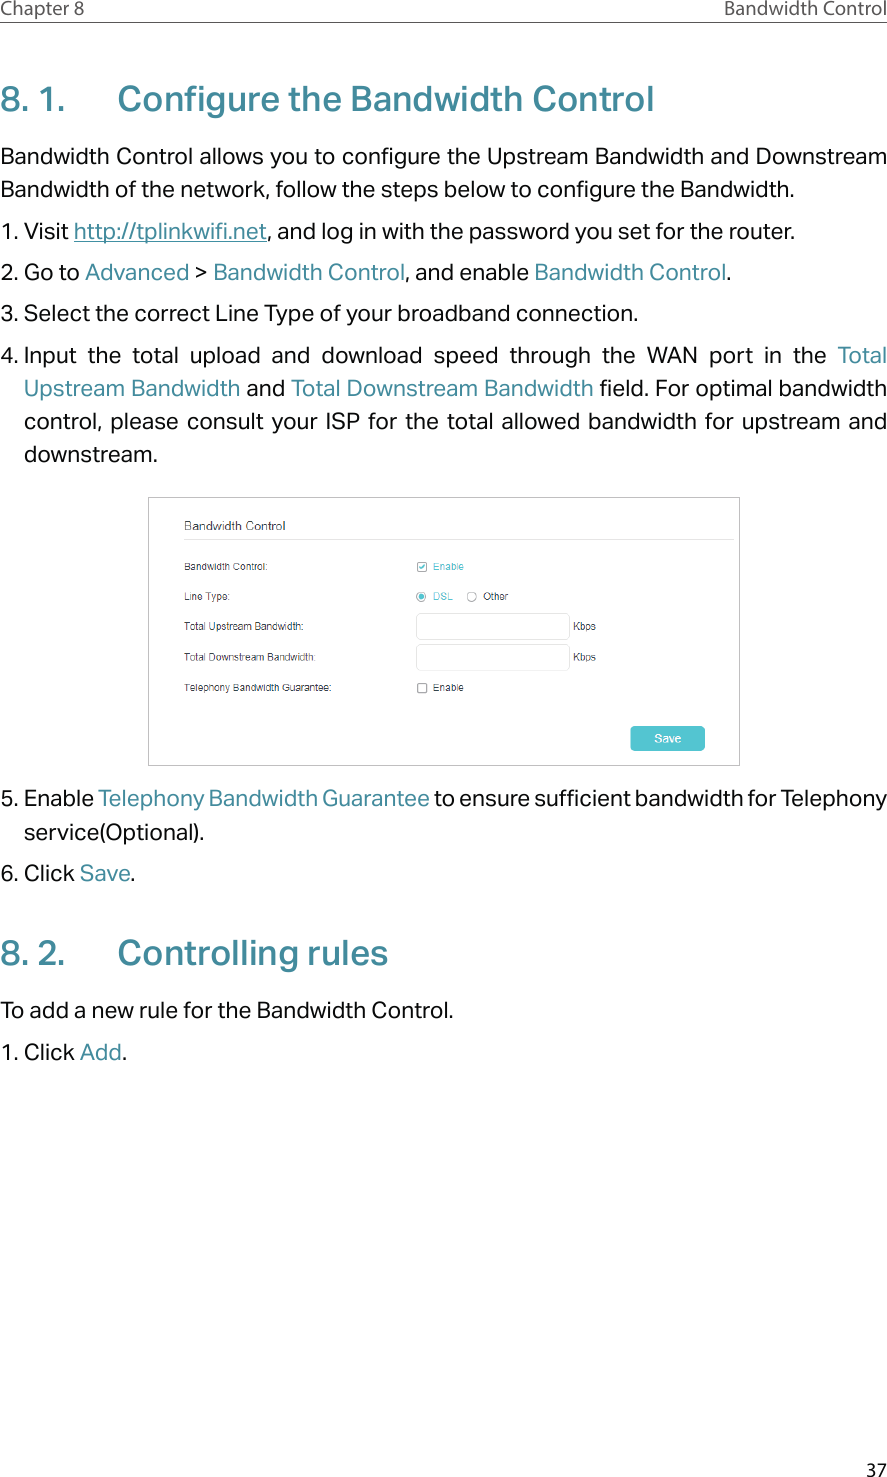 37Chapter 8 Bandwidth Control8. 1.  Configure the Bandwidth ControlBandwidth Control allows you to configure the Upstream Bandwidth and Downstream Bandwidth of the network, follow the steps below to configure the Bandwidth.1. Visit http://tplinkwifi.net, and log in with the password you set for the router.2. Go to Advanced &gt; Bandwidth Control, and enable Bandwidth Control.3. Select the correct Line Type of your broadband connection.4. Input the total upload and download speed through the WAN port in the Total Upstream Bandwidth and Total Downstream Bandwidth field. For optimal bandwidth control, please consult your ISP for the total allowed bandwidth for upstream and downstream.5. Enable Telephony Bandwidth Guarantee to ensure sufficient bandwidth for Telephony service(Optional).6. Click Save.8. 2.  Controlling rulesTo add a new rule for the Bandwidth Control.1. Click Add.